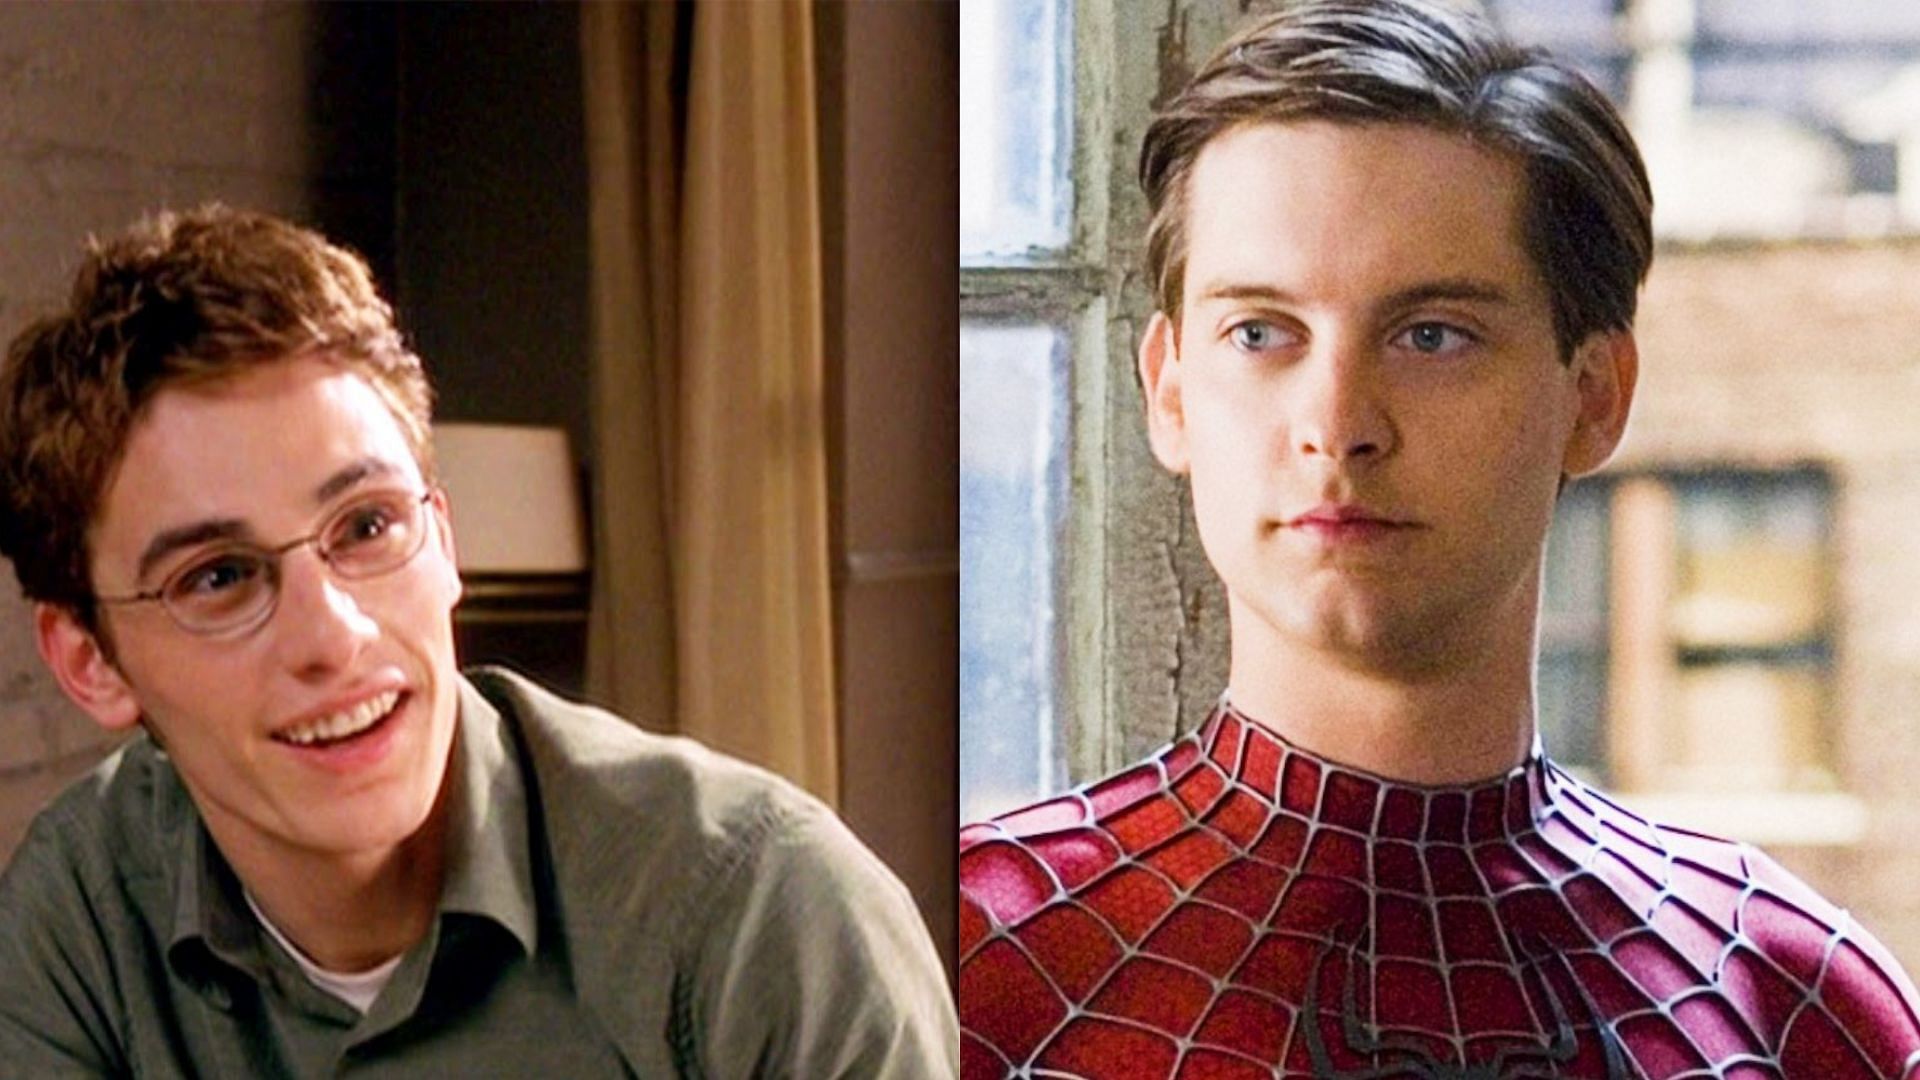 James Franco as Harry Osborn and Tobey Maguire as Peter Parker/Spider-Man (Image via Marvel/Sony)